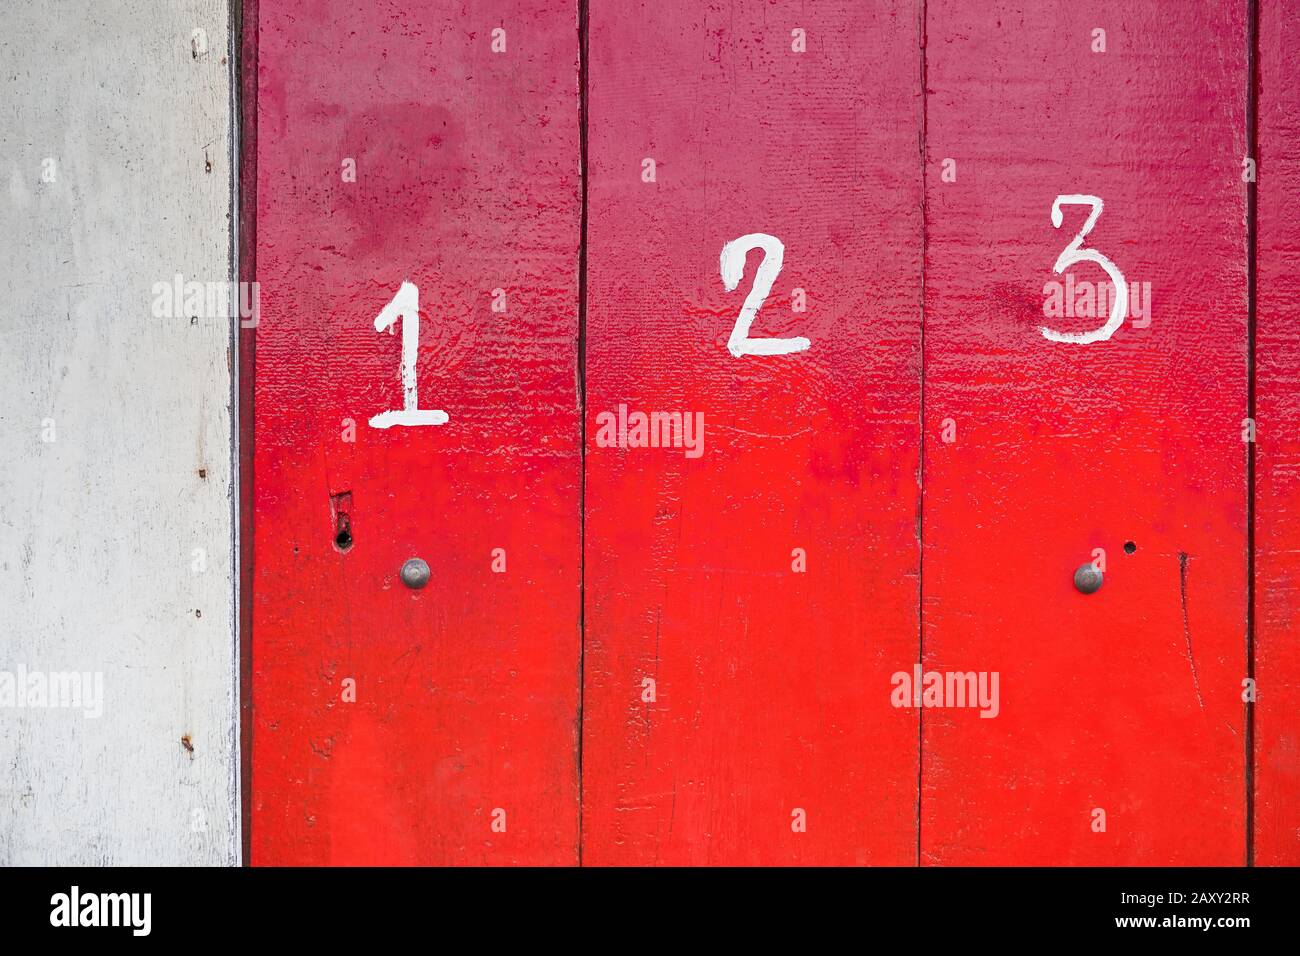 The entrance of a shop is closed with red painted wooden panels, which are marked with white numbers. It is often seen in the Philippines, Asia. Stock Photo